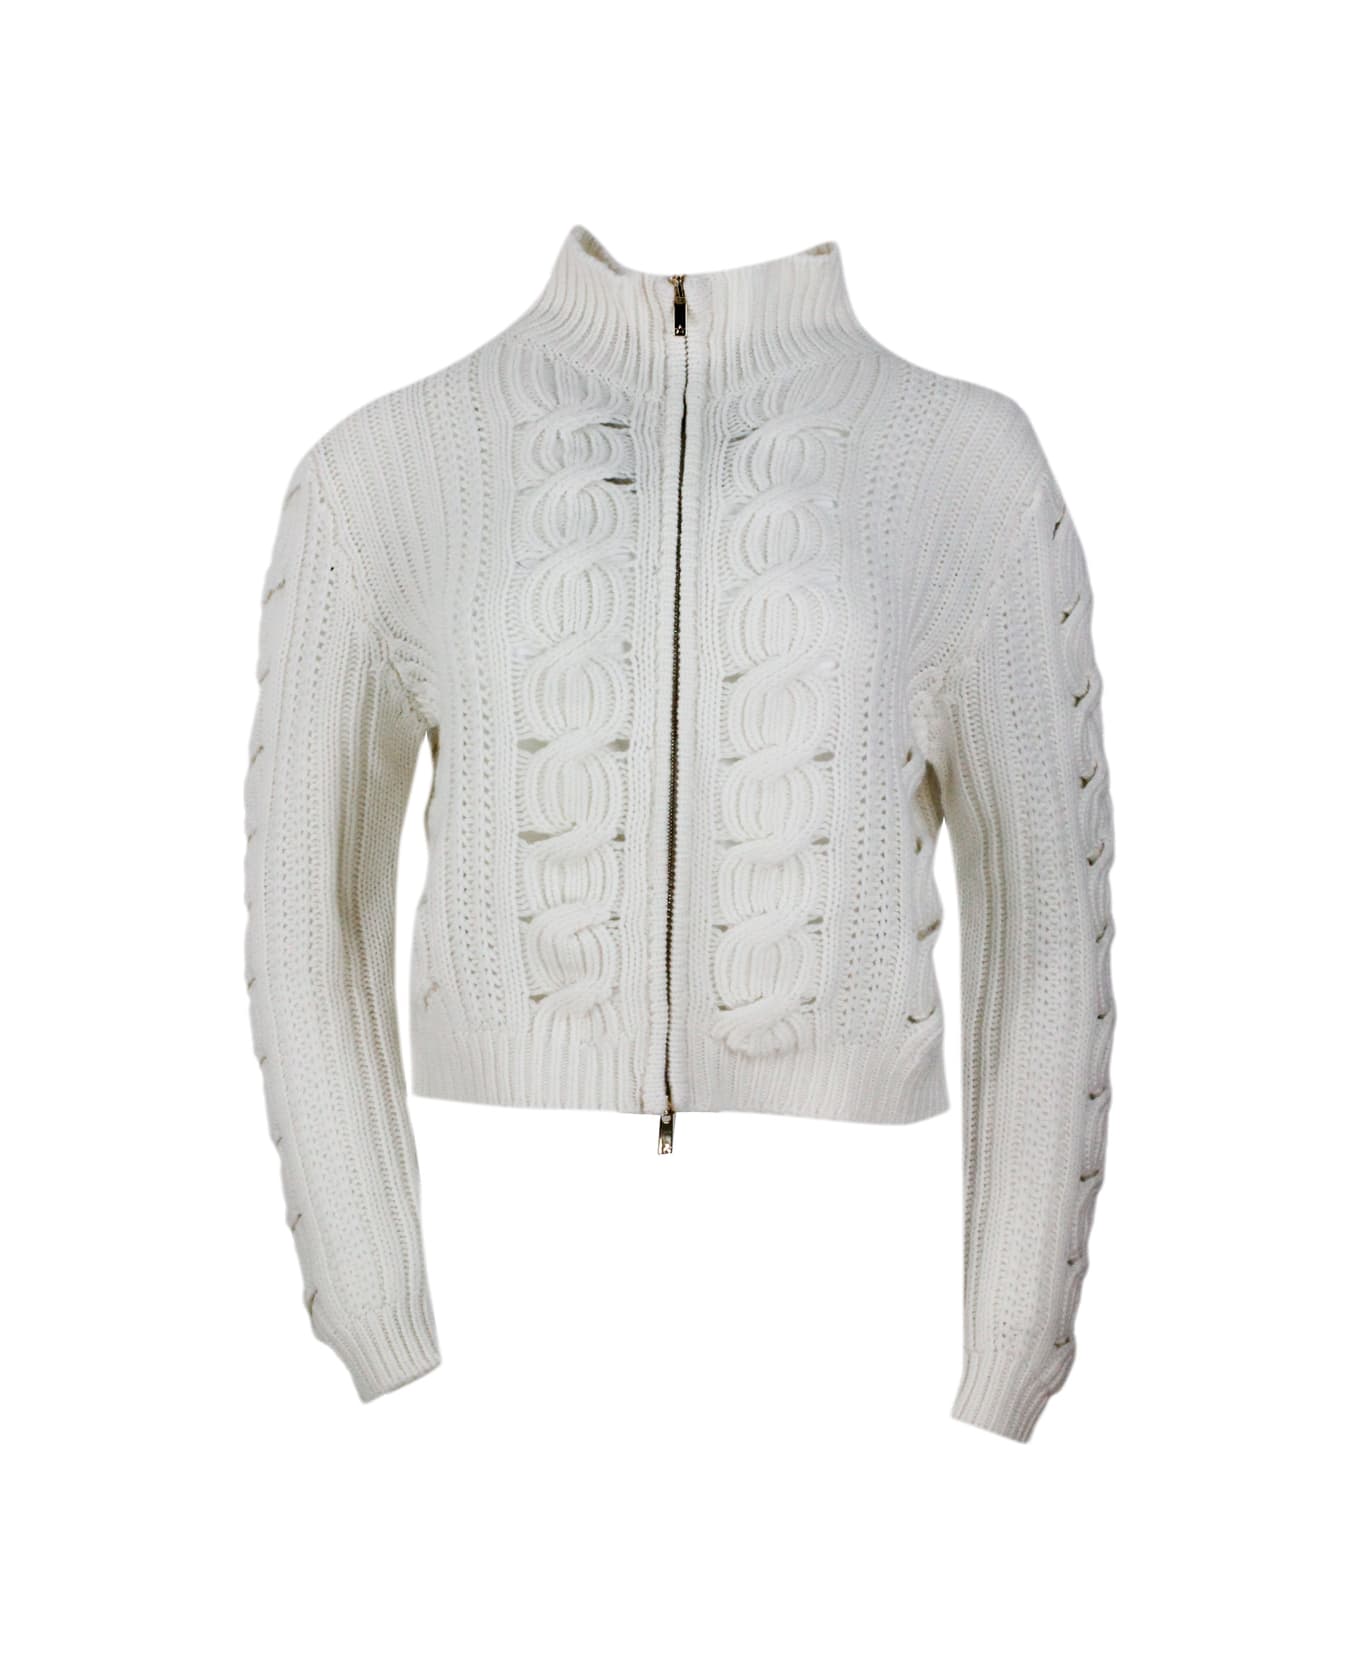 Lorena Antoniazzi Full Zip Turtleneck Sweater Made Of Soft Wool, Cashmere And Silk With Cable Knit - White